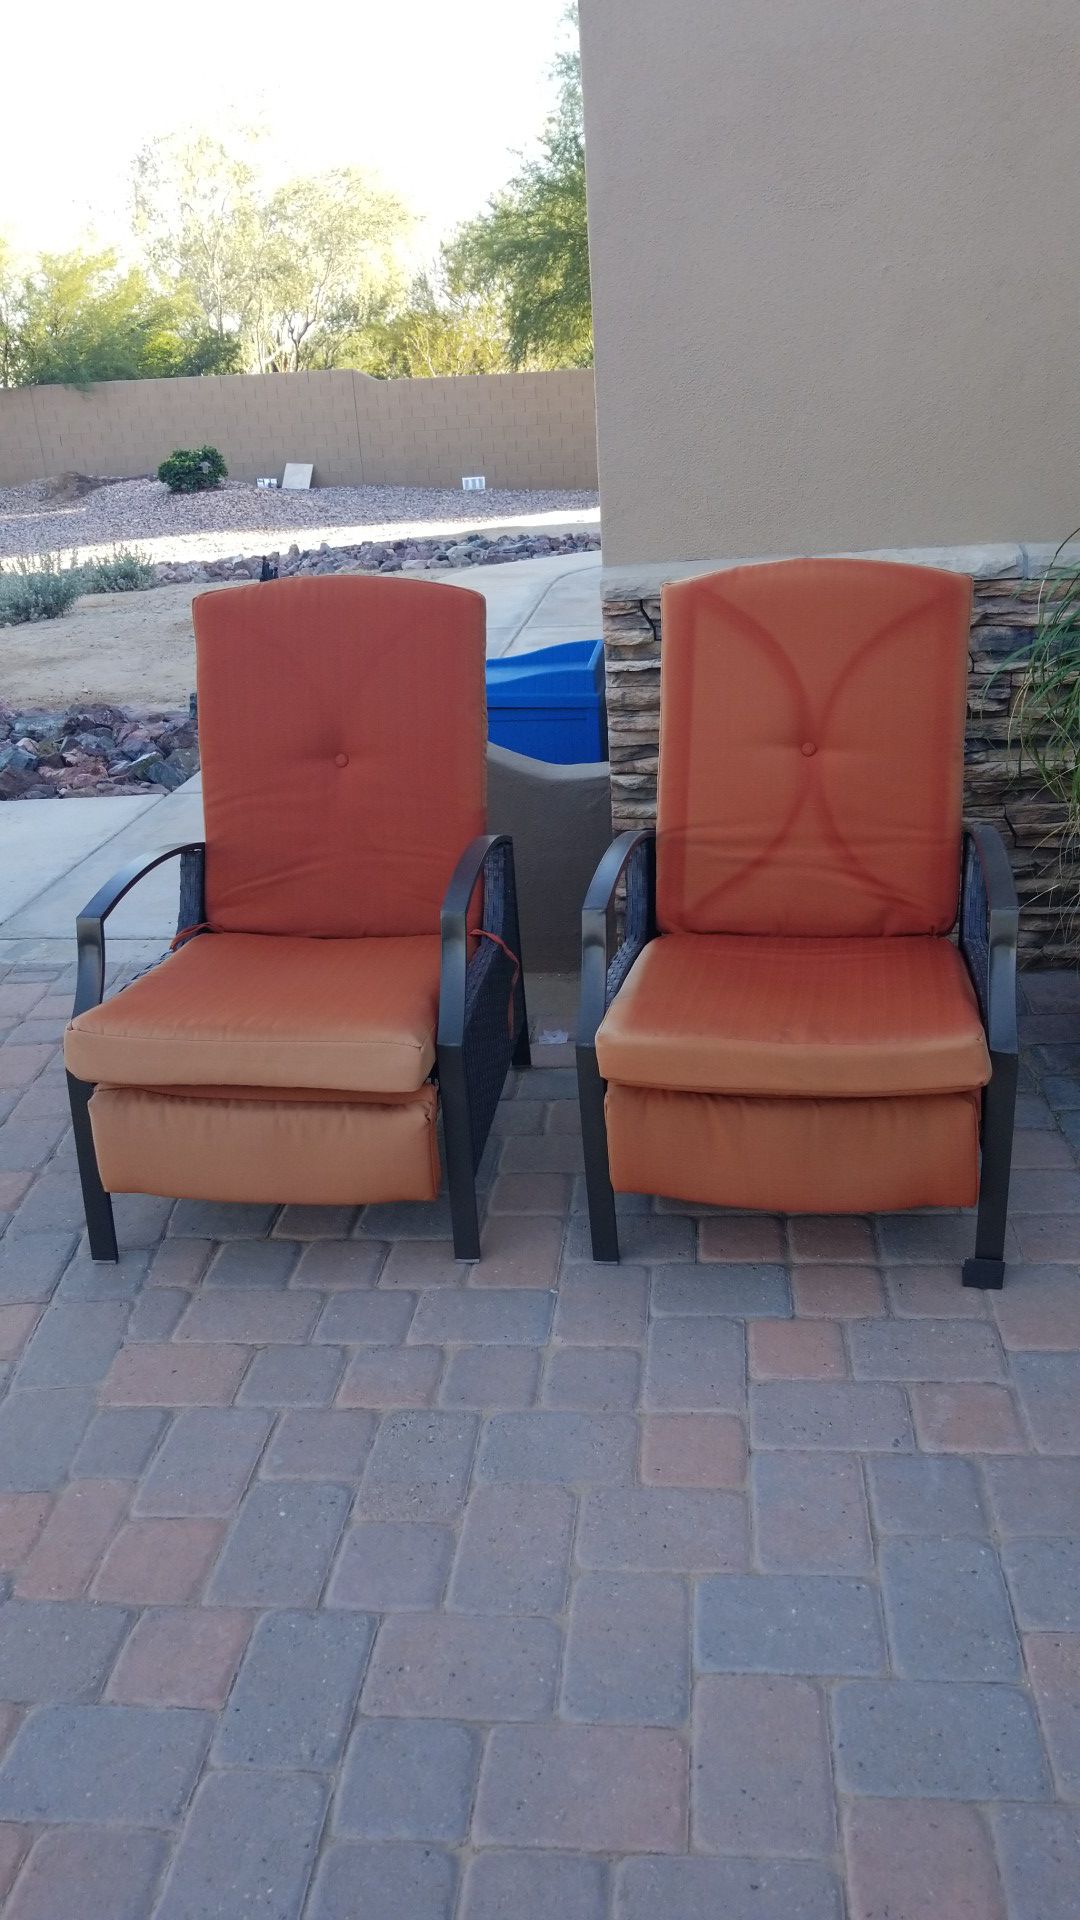 Reclining outdoor chairs